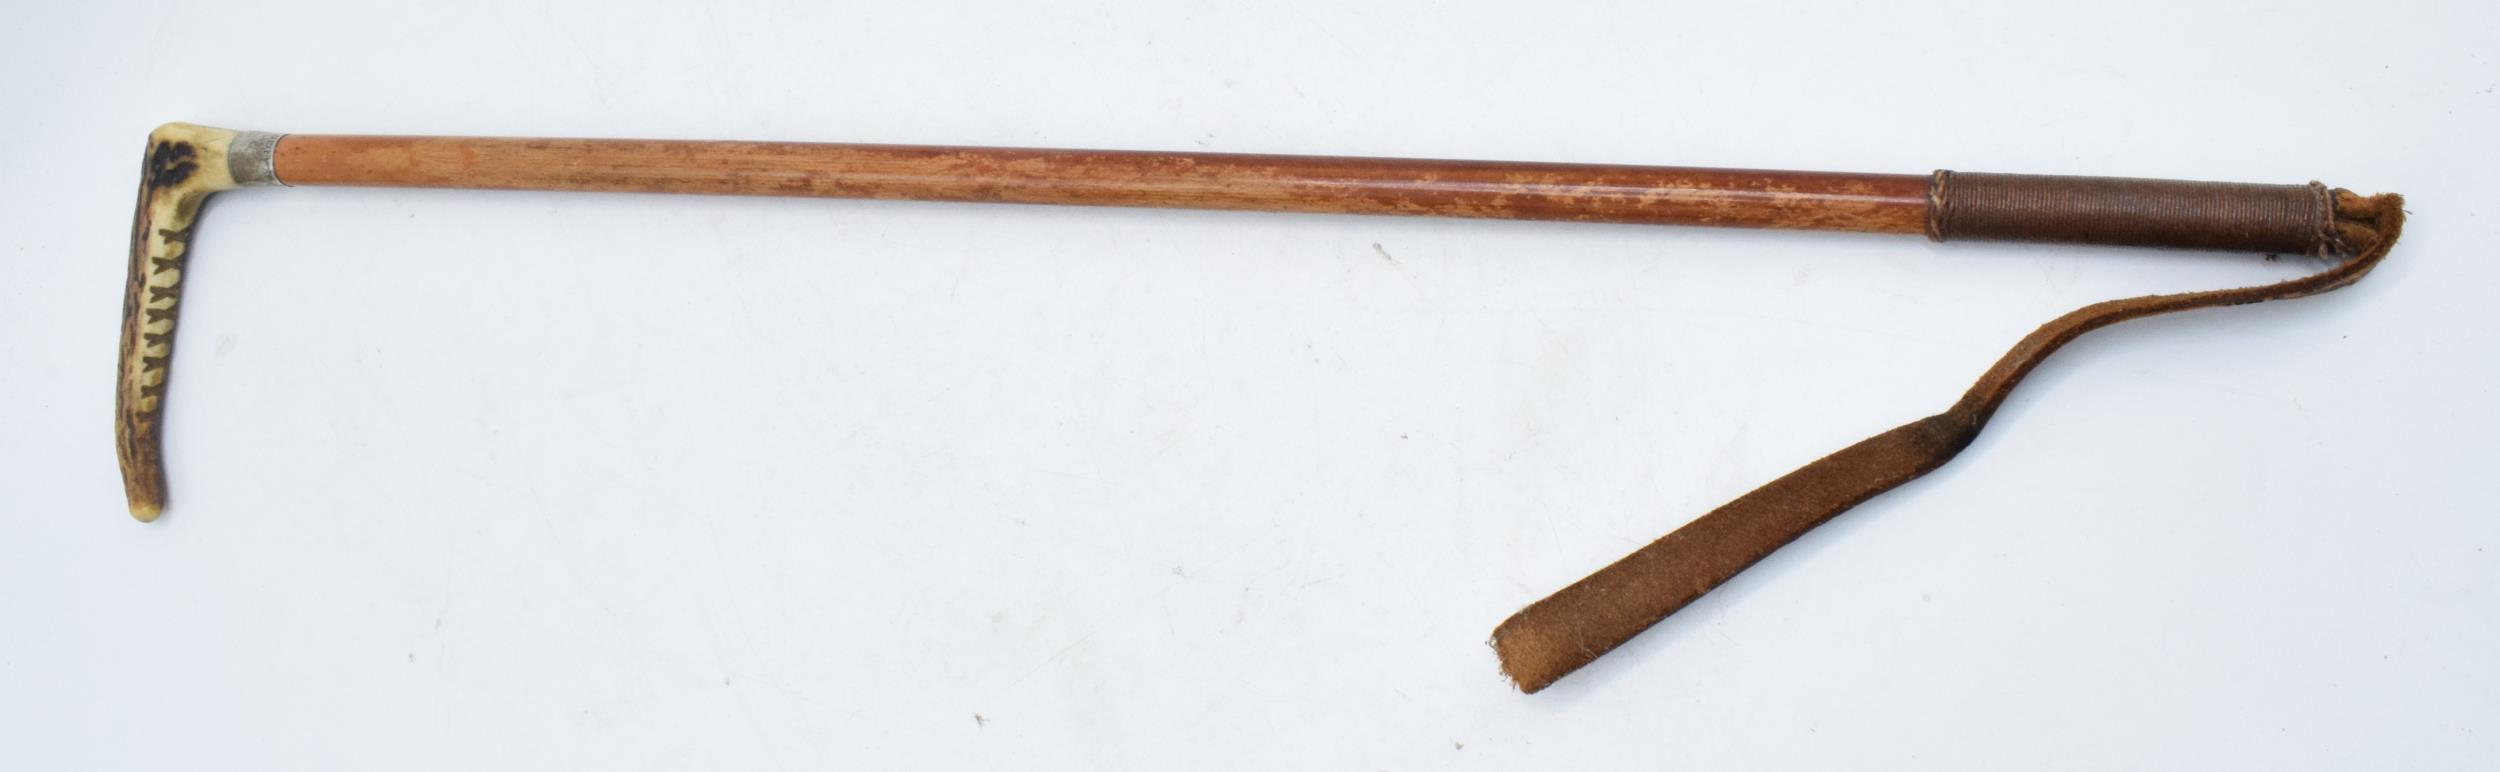 A silver collared wooden and horn handled riding crop. 51cm tall.